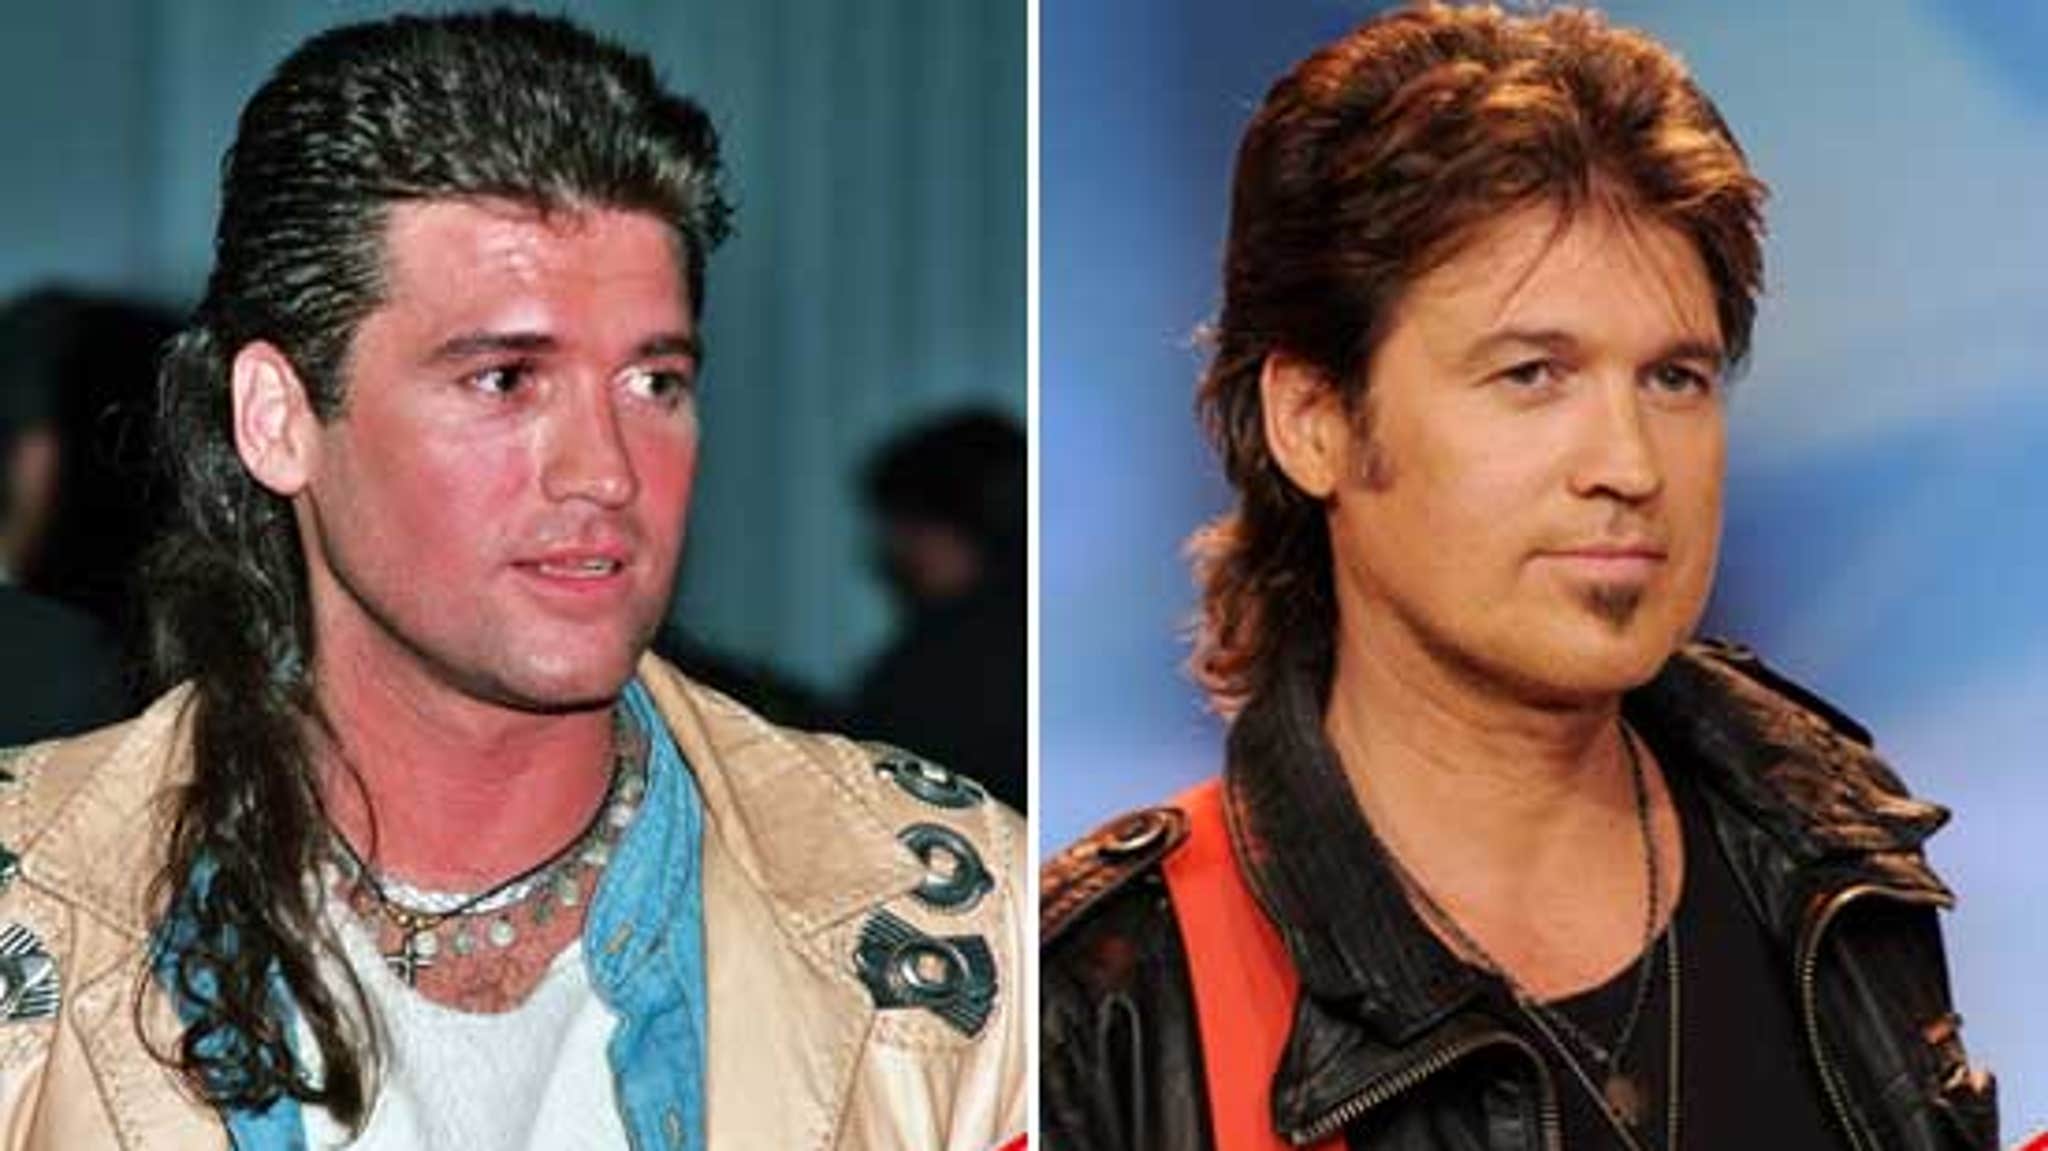 Billy Ray Cyrus' mullet is the only thing that appears to have gotten ...